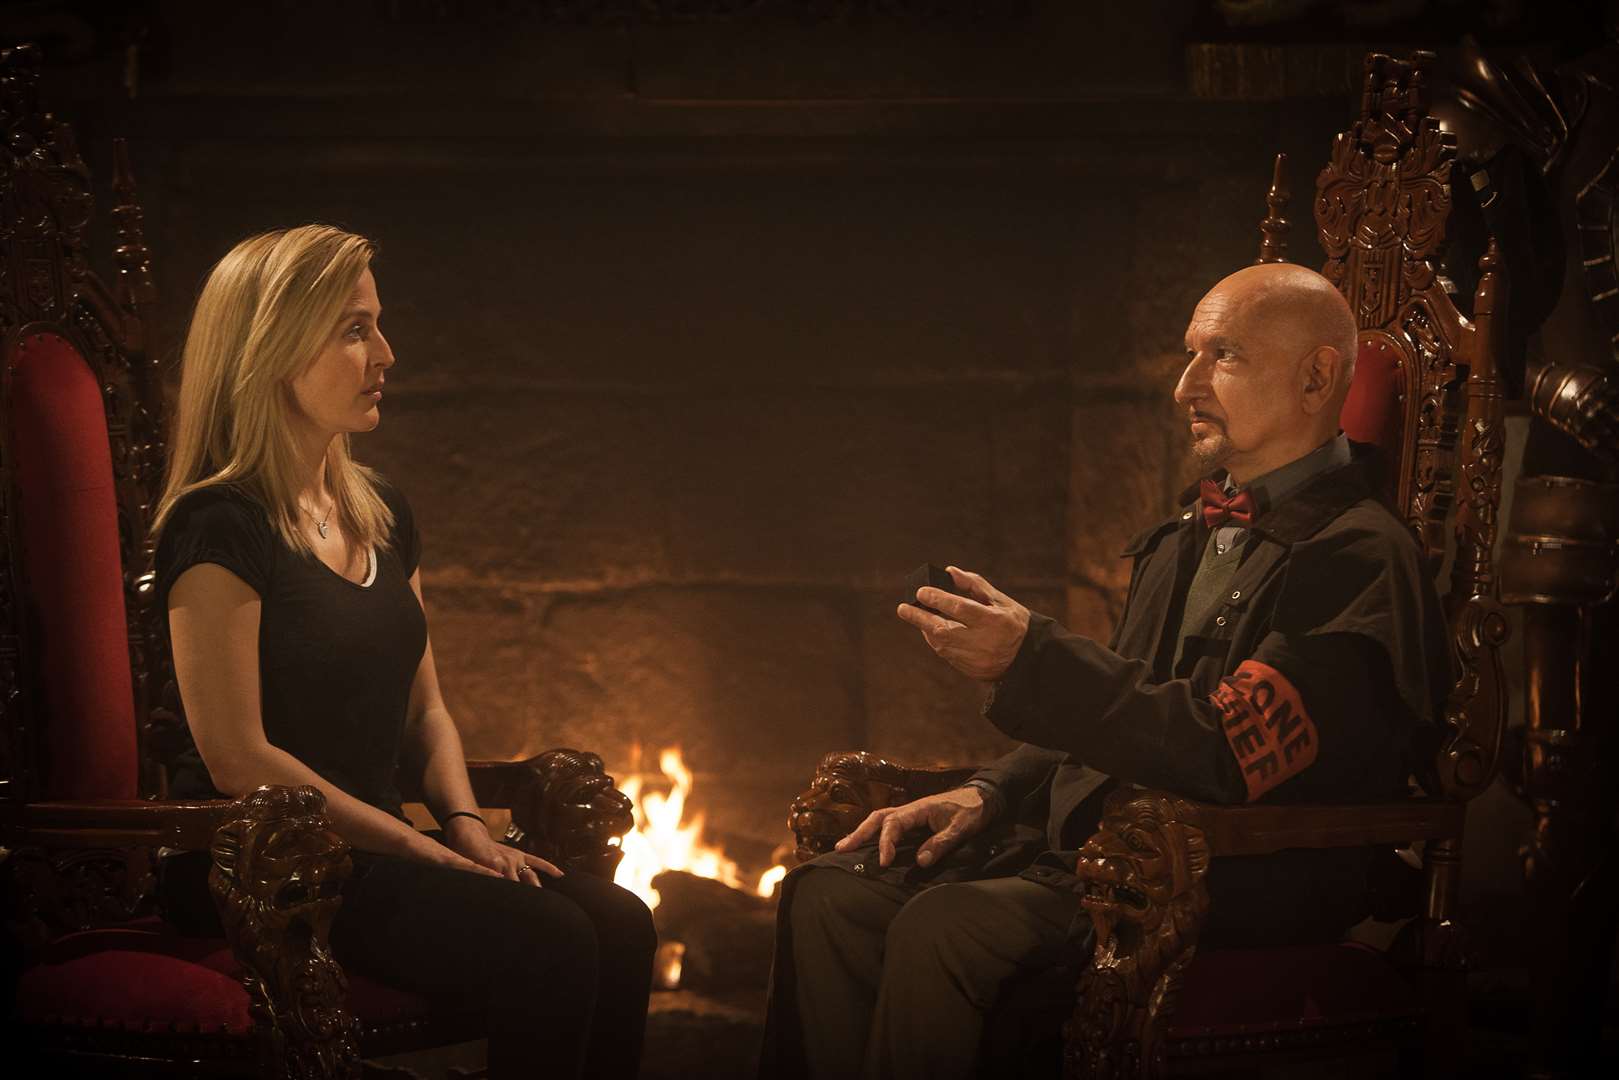 The film stars Sir Ben Kingsley and Gillian Anderson